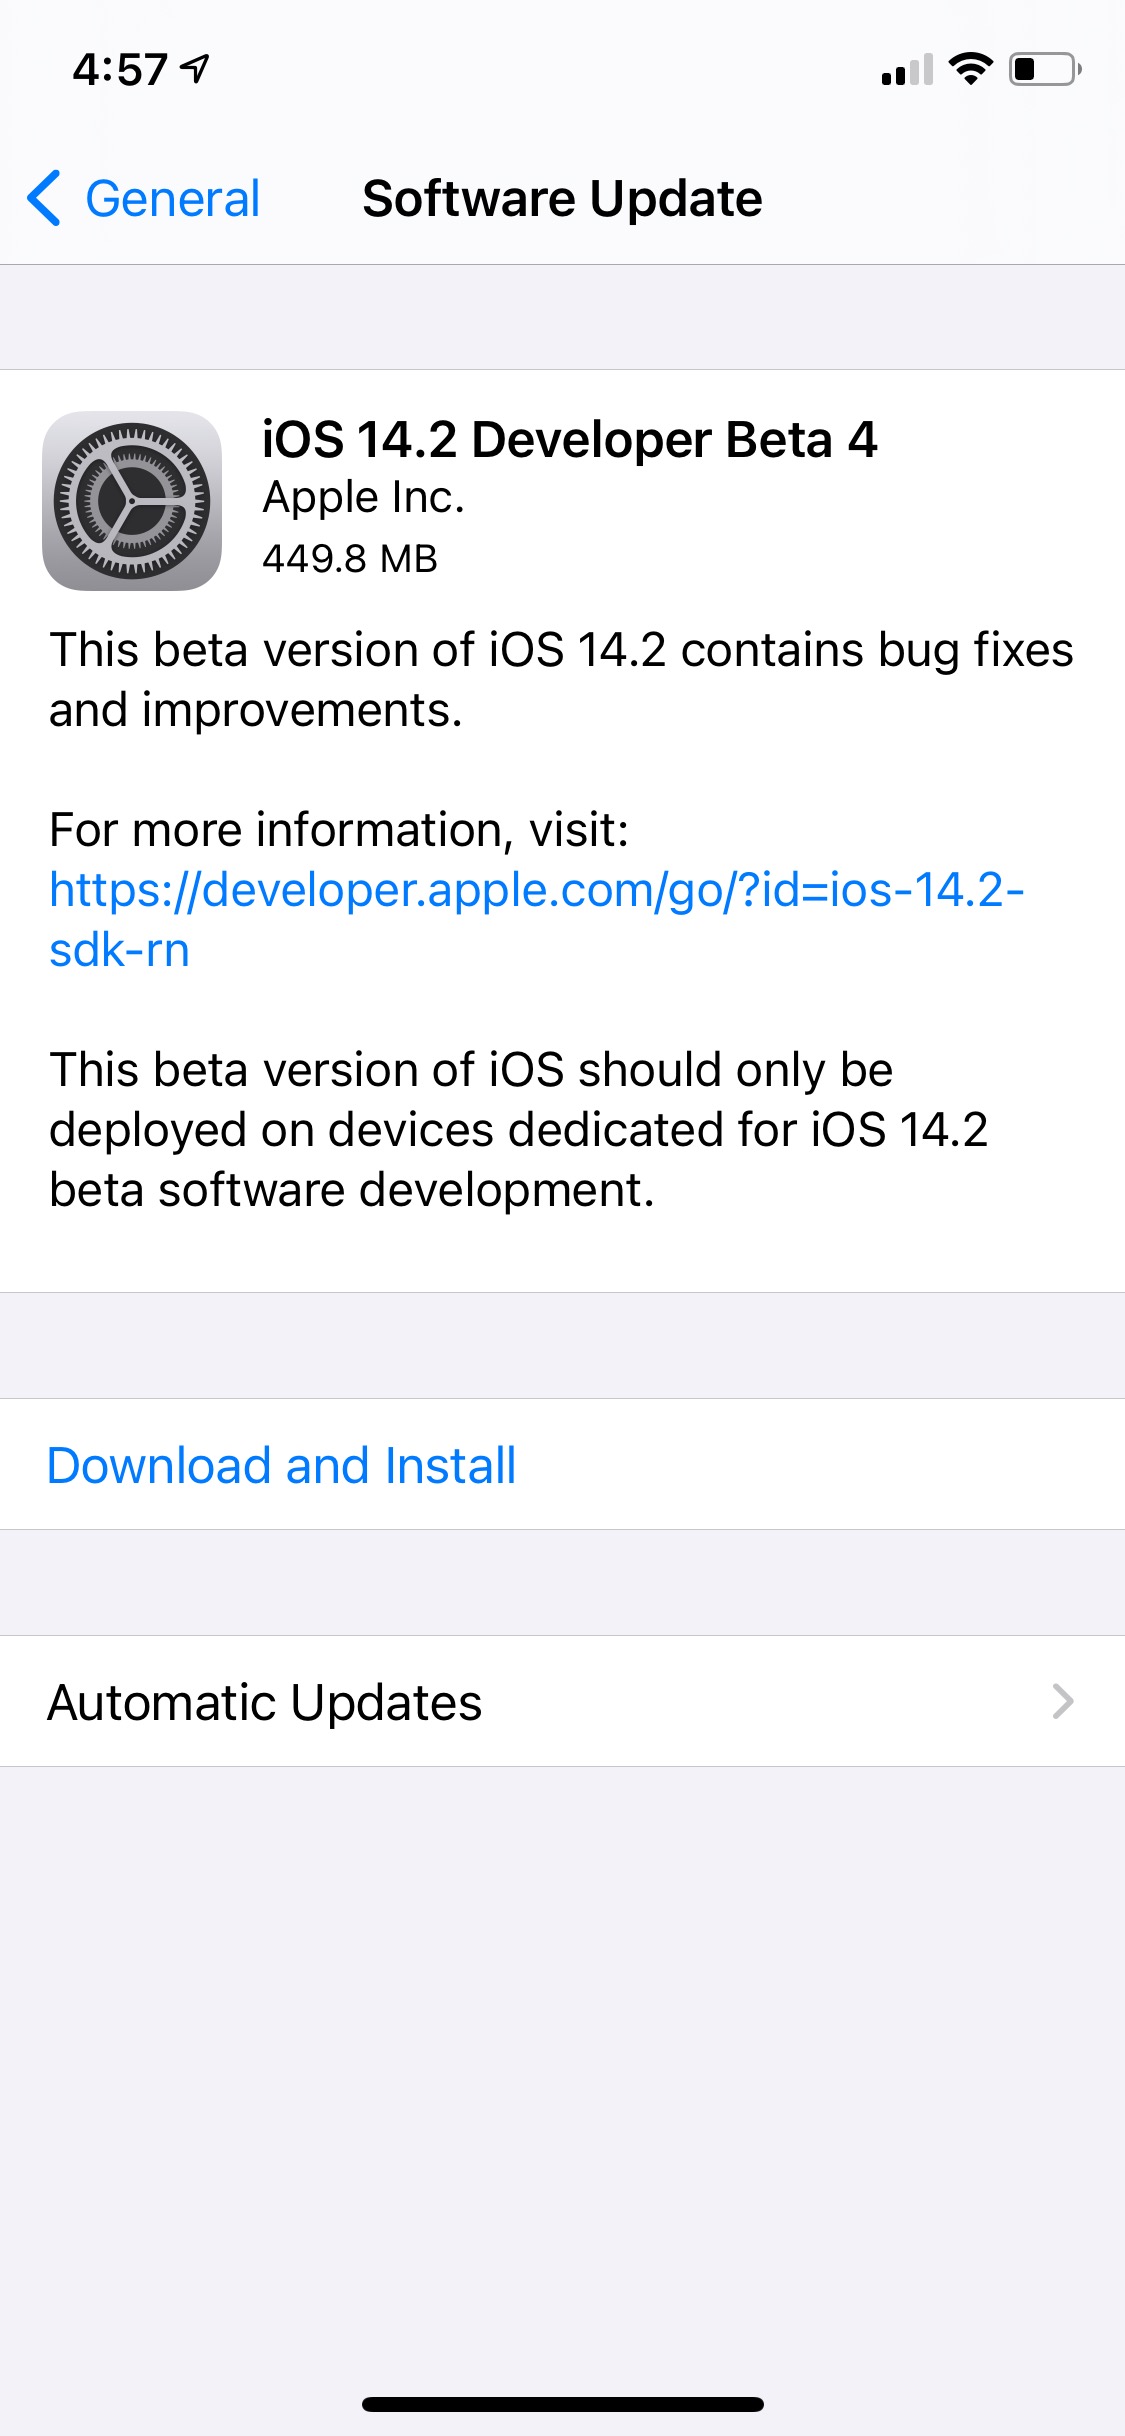 Apple Releases iOS 14.2 Beta 4 and iPadOS 14.2 Beta 4 [Download]